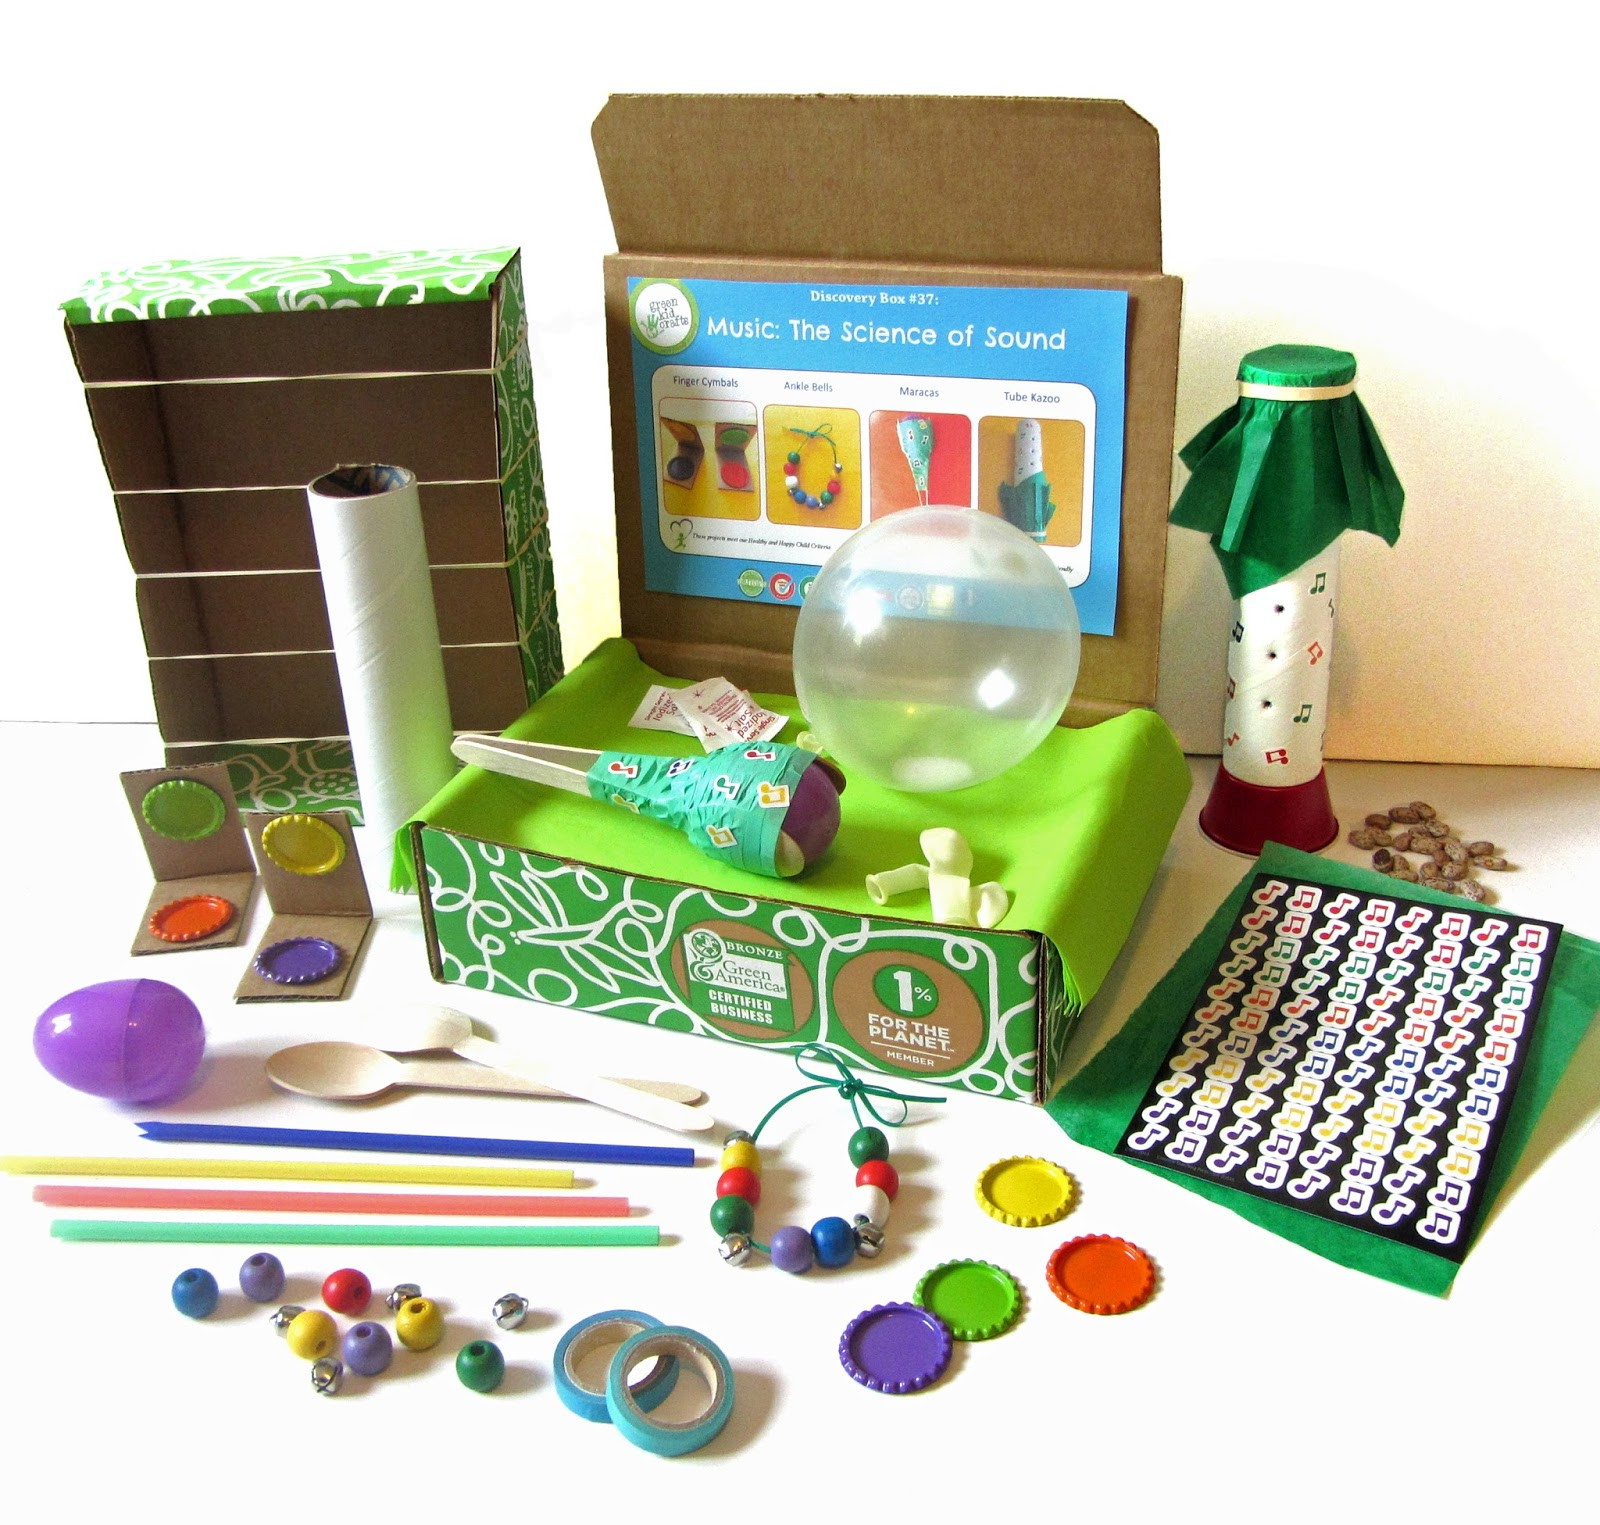 Craft Kits For Kids
 Hobo Mama Green Kid Crafts Honest review of a STEM Arts